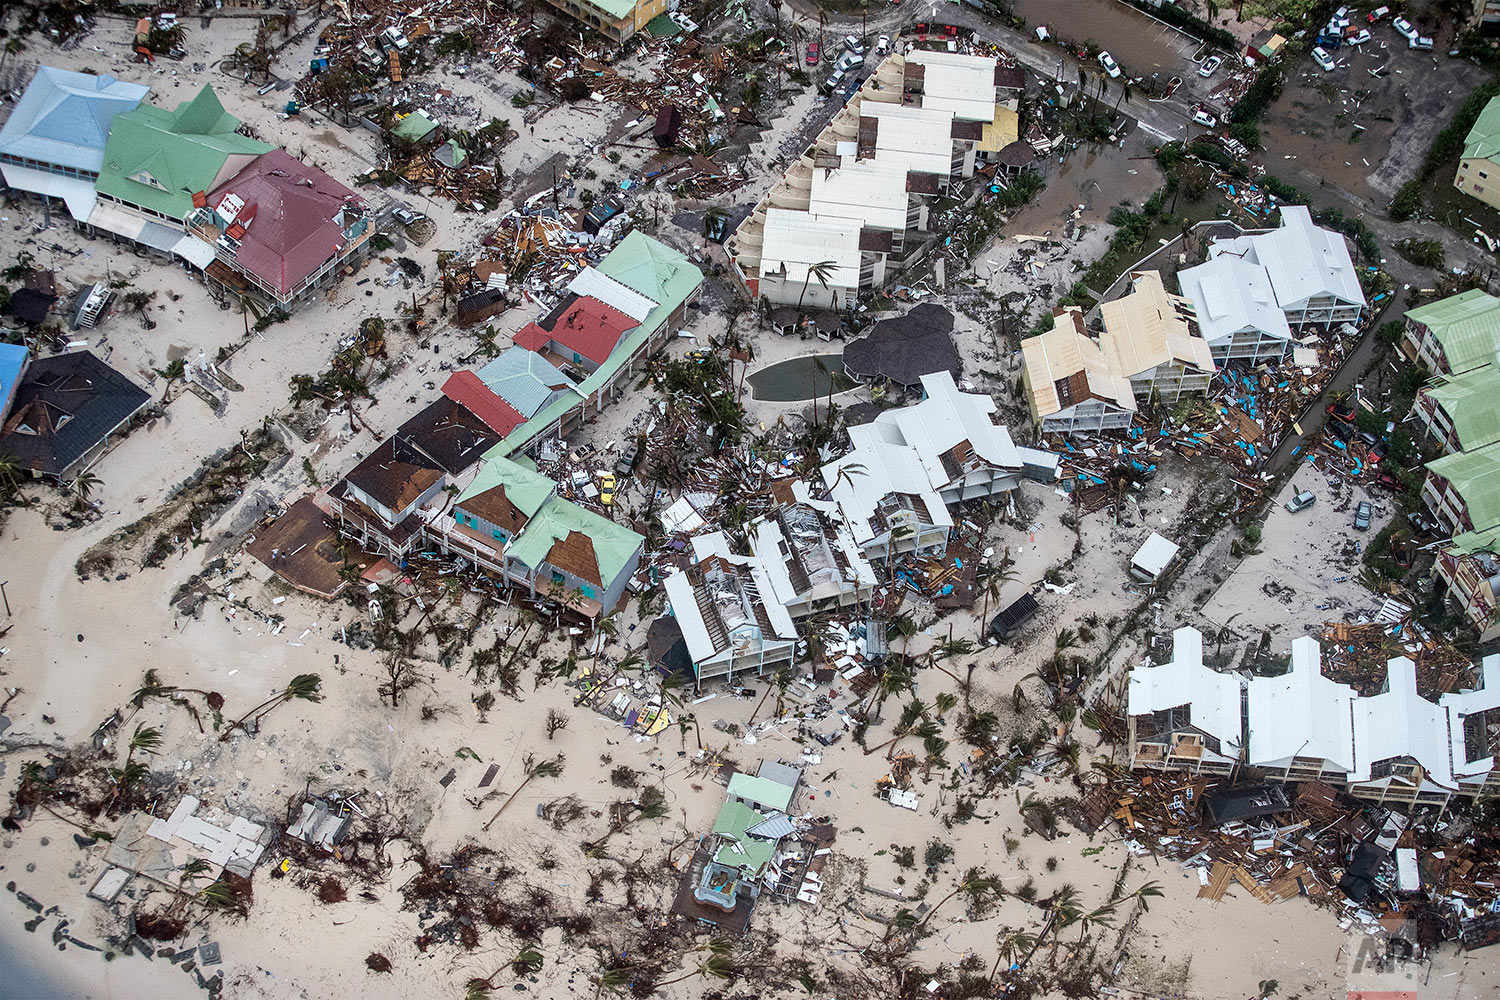  This Sept. 6, 2017 photo provided by the Dutch Defense Ministry shows storm damage in the aftermath of Hurricane Irma, in St. Maarten. Irma cut a path of devastation across the northern Caribbean, leaving thousands homeless after destroying building